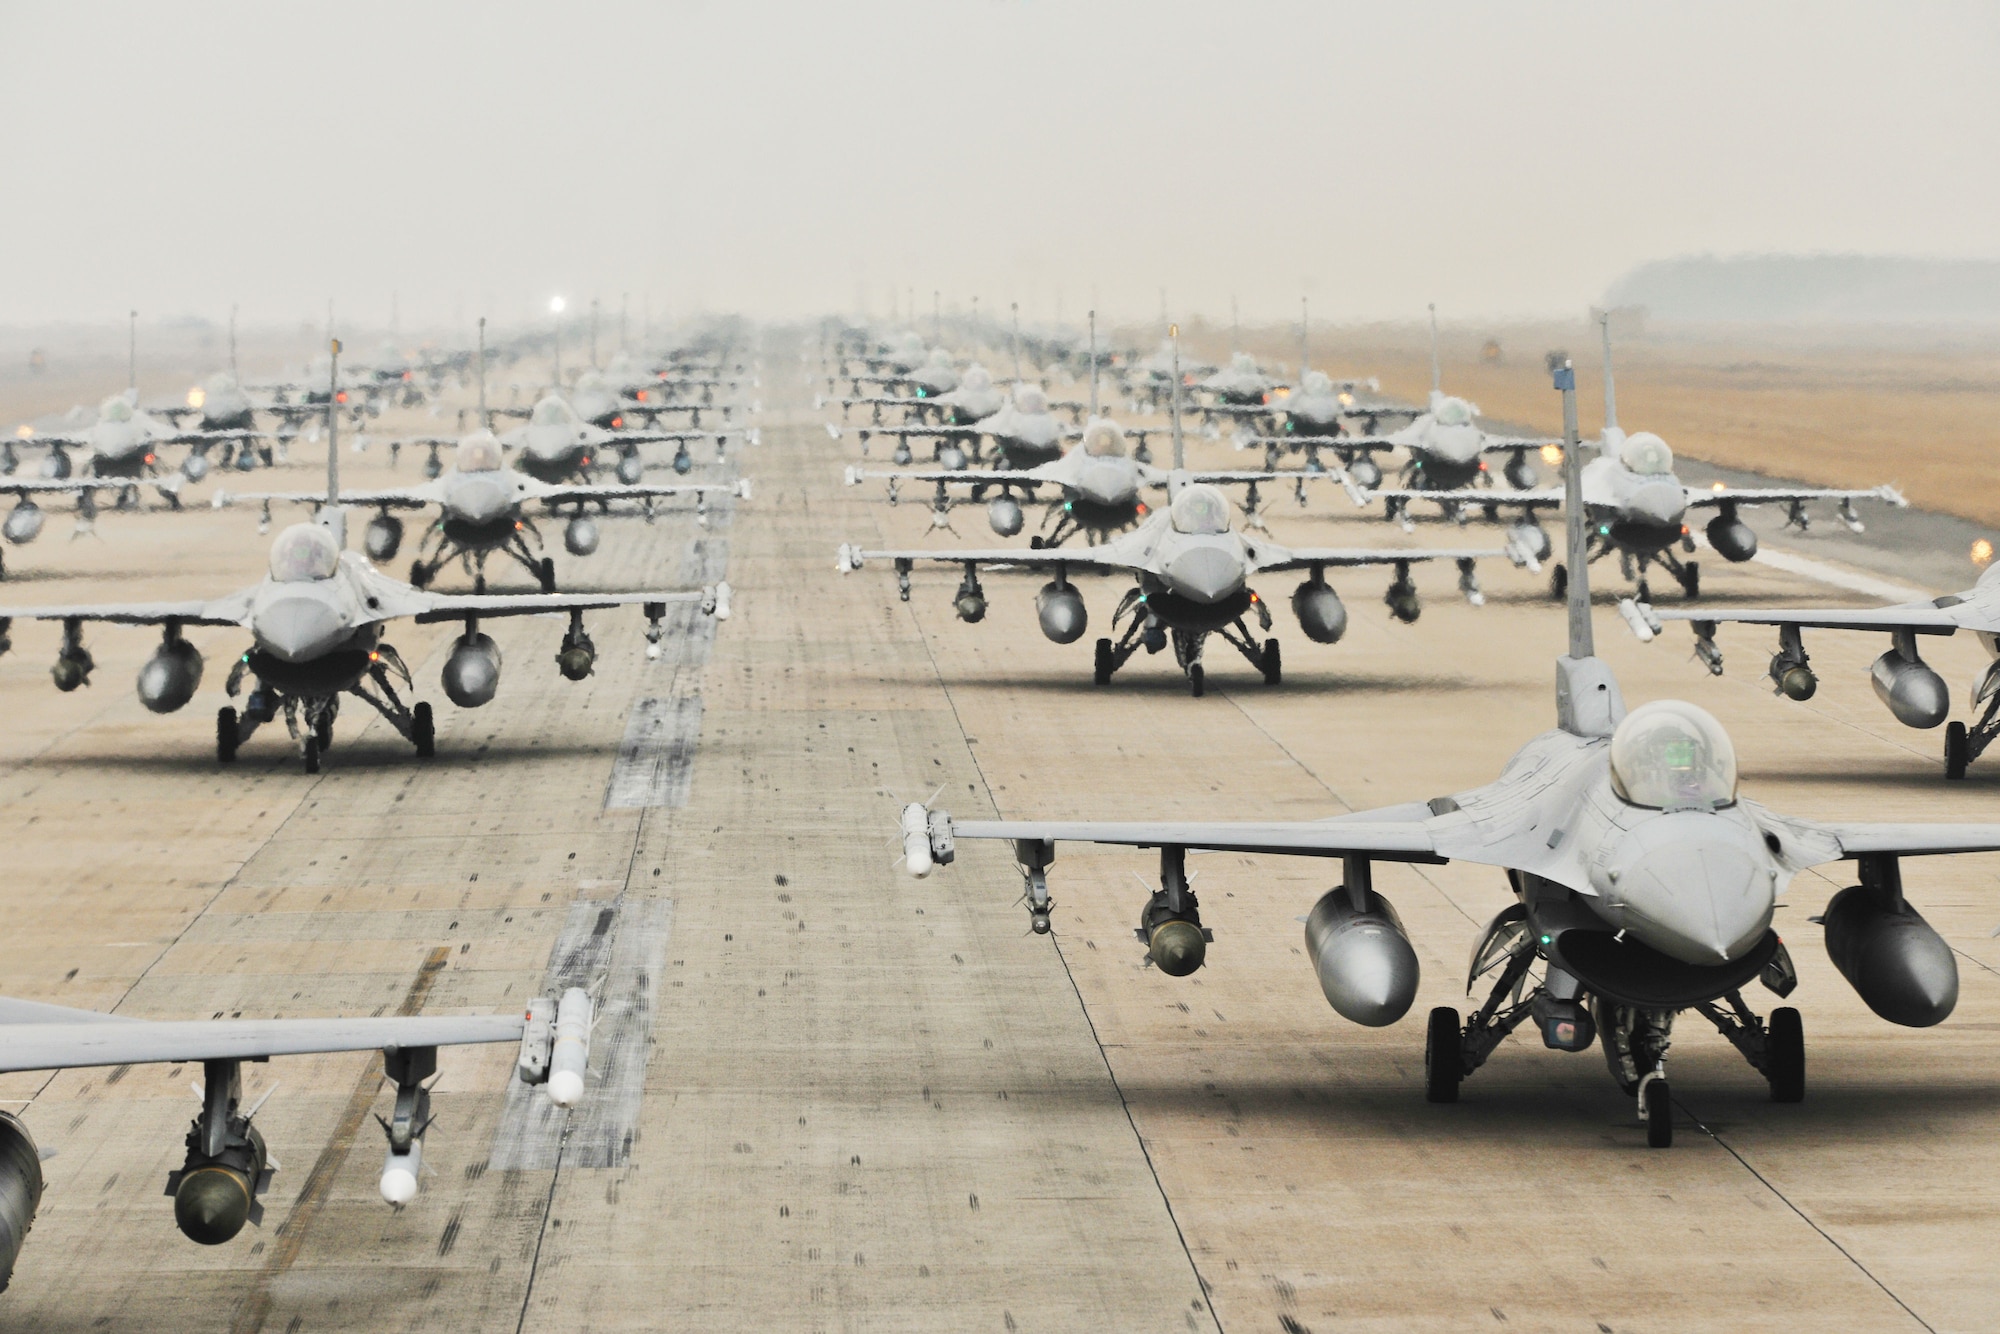 F-16 Fighting Falcons from the 35th and 80th Fighter Squadrons of the 8th Fighter Wing, Kunsan Air Base, Republic of Korea; the 421st Expeditionary Fighter Squadron of the 388th FW at Hill Air Force Base, Utah; the 55th EFS from the 20th FW at Shaw AFB, S.C.; and from the 38th Fighter Group of the ROK Air Force, demonstrate an “Elephant Walk” as they taxi down a runway during an exercise at Kunsan Air Base, Republic of Korea, March 2, 2012. The exercise showcased Kunsan AB aircrews' capability to quickly and safely prepare an aircraft for a wartime mission. (U.S. Air Force photo by Senior Airman Brittany Y. Auld/Released)